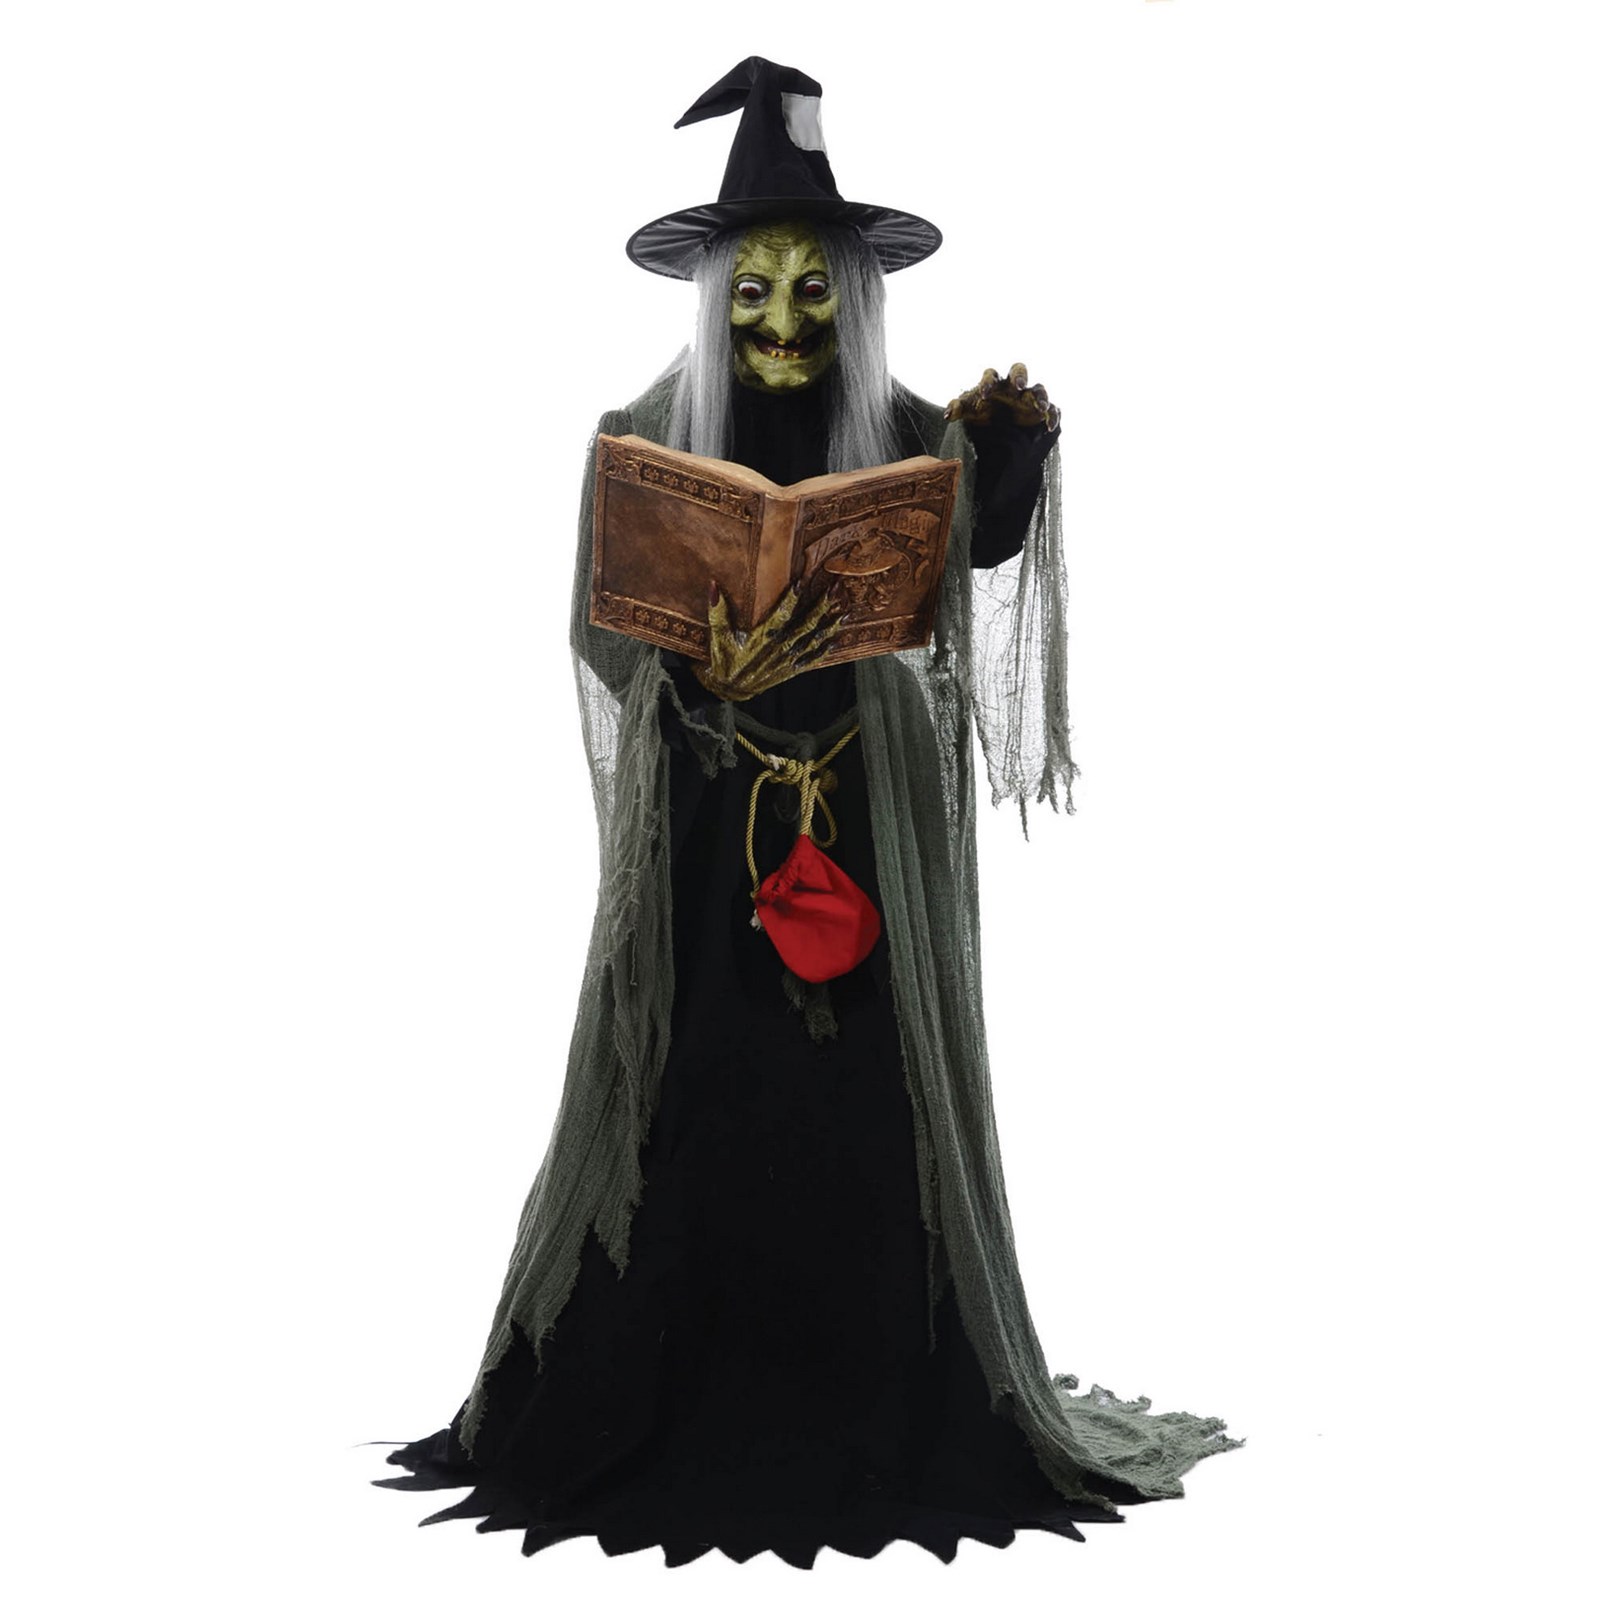 5' Animated Spell Casting Witch with Lights & Sound Halloween Decoration - image 1 of 2